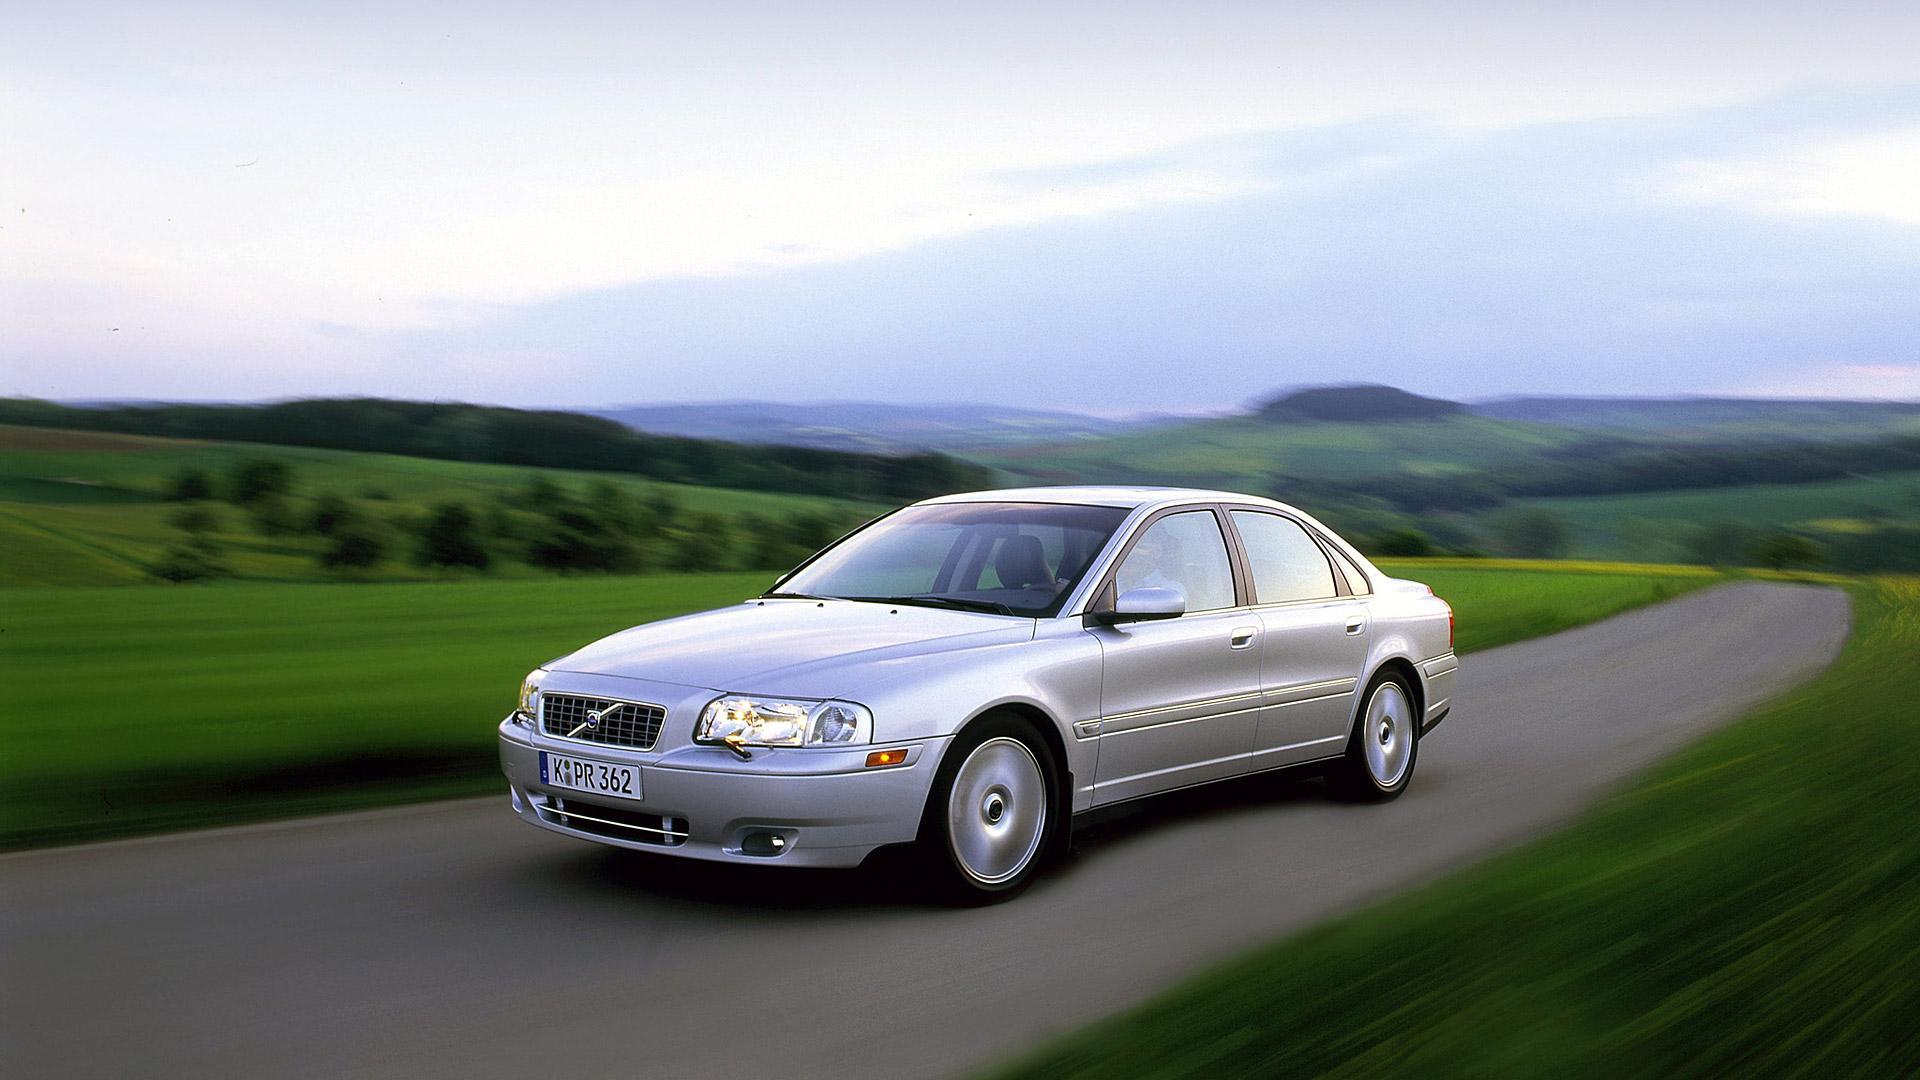 Volvo S80 Wallpapers Top Free Volvo S80 Backgrounds Wallpaperaccess